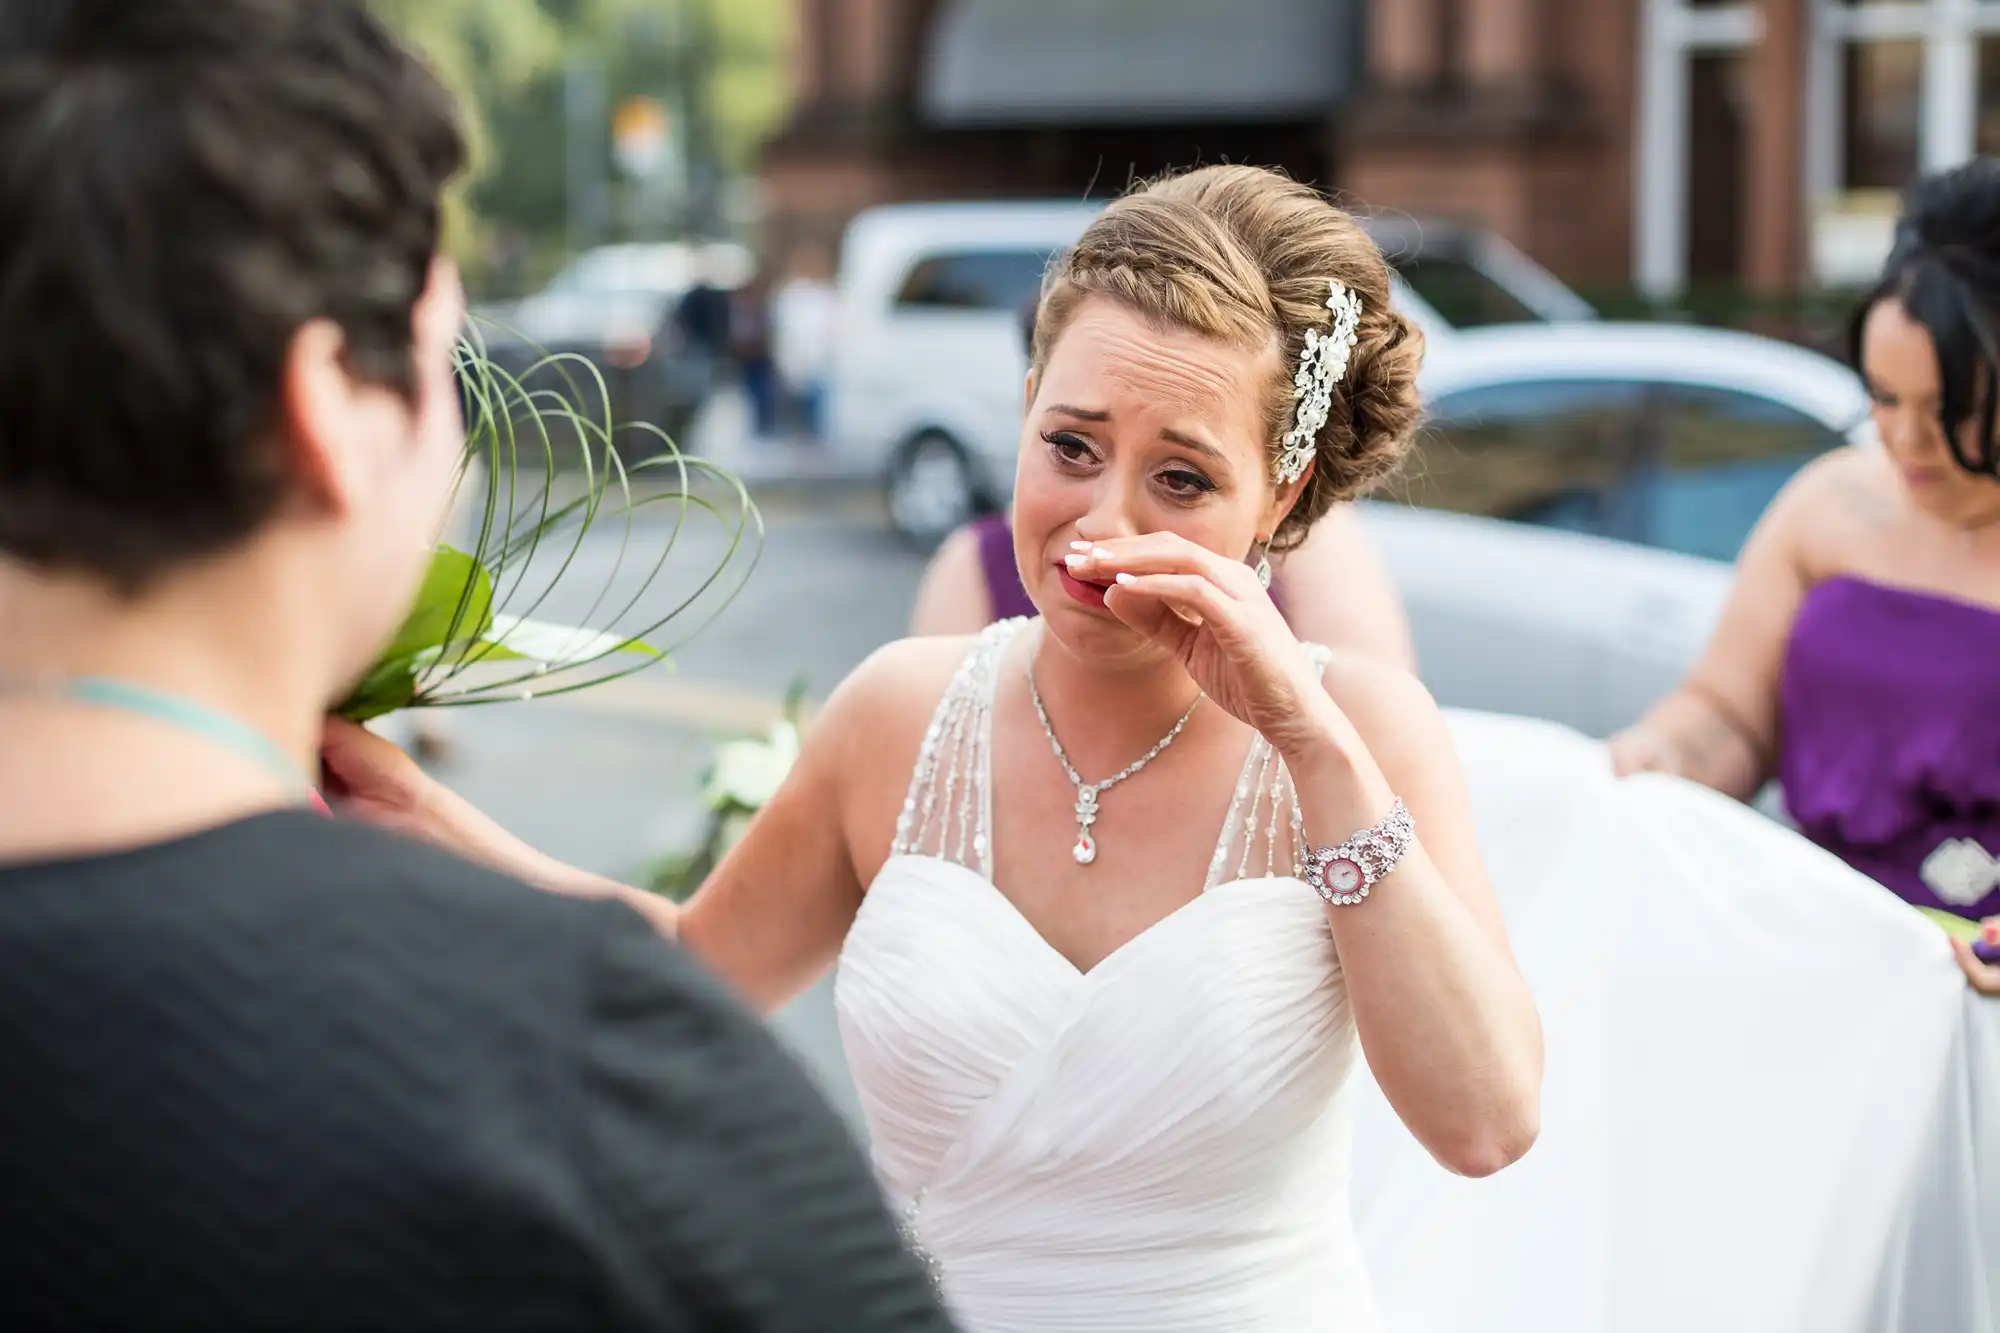 A bride in a white gown wiping tears from her eyes while holding a bouquet, speaking to a woman in a dark dress at an outdoor wedding.